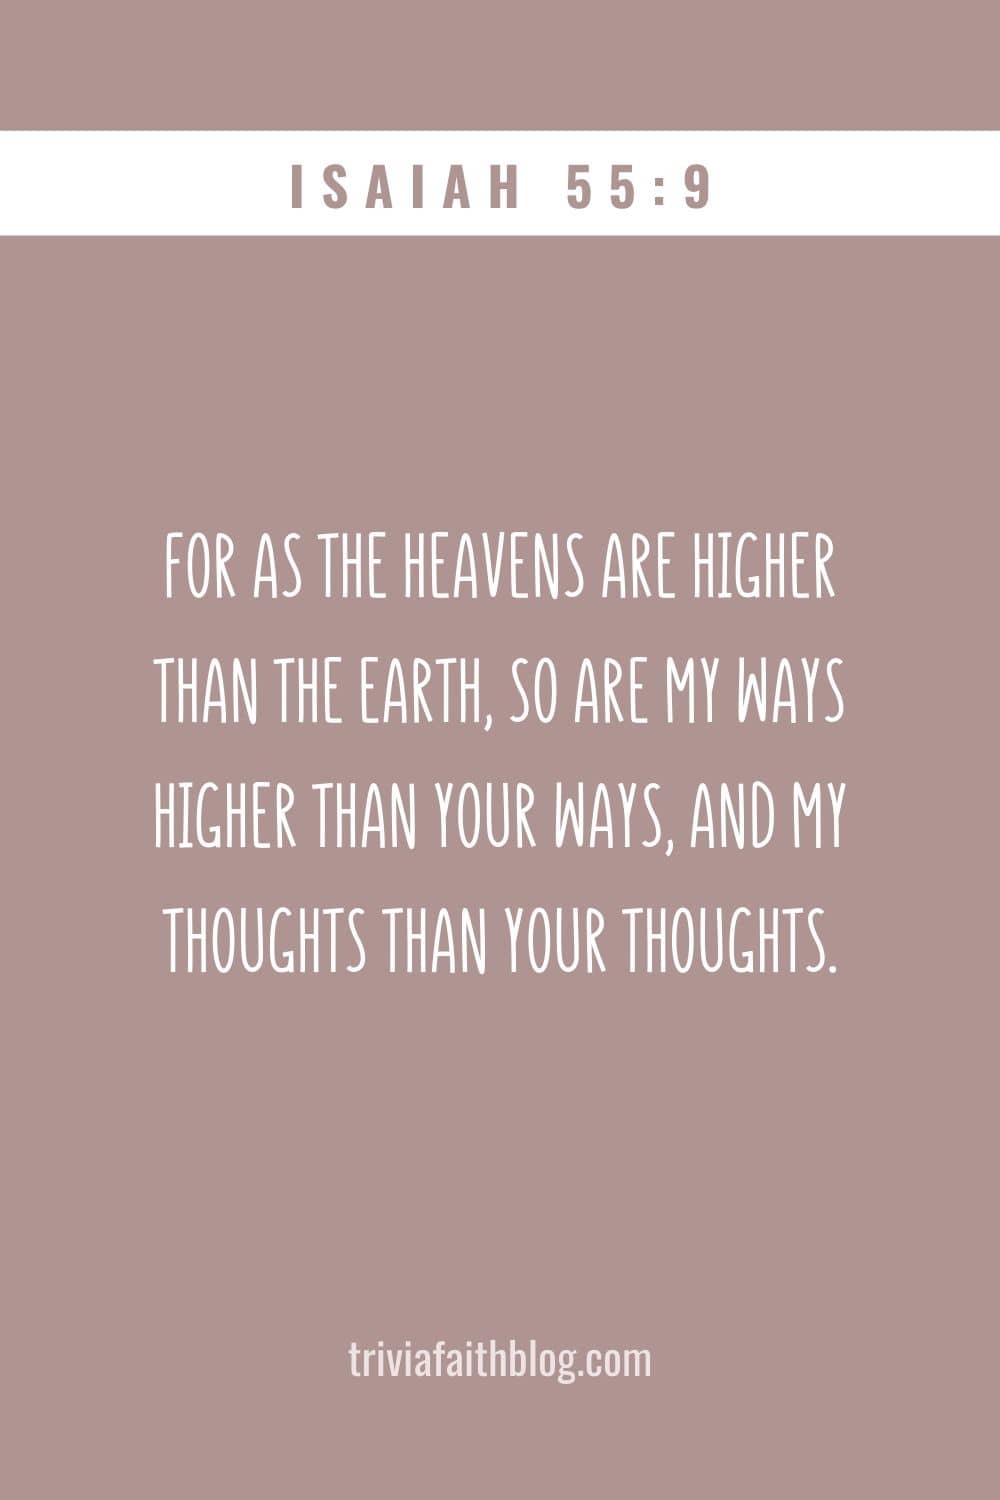 For as the heavens are higher than the earth, so are my ways higher than your ways, and my thoughts than your thoughts